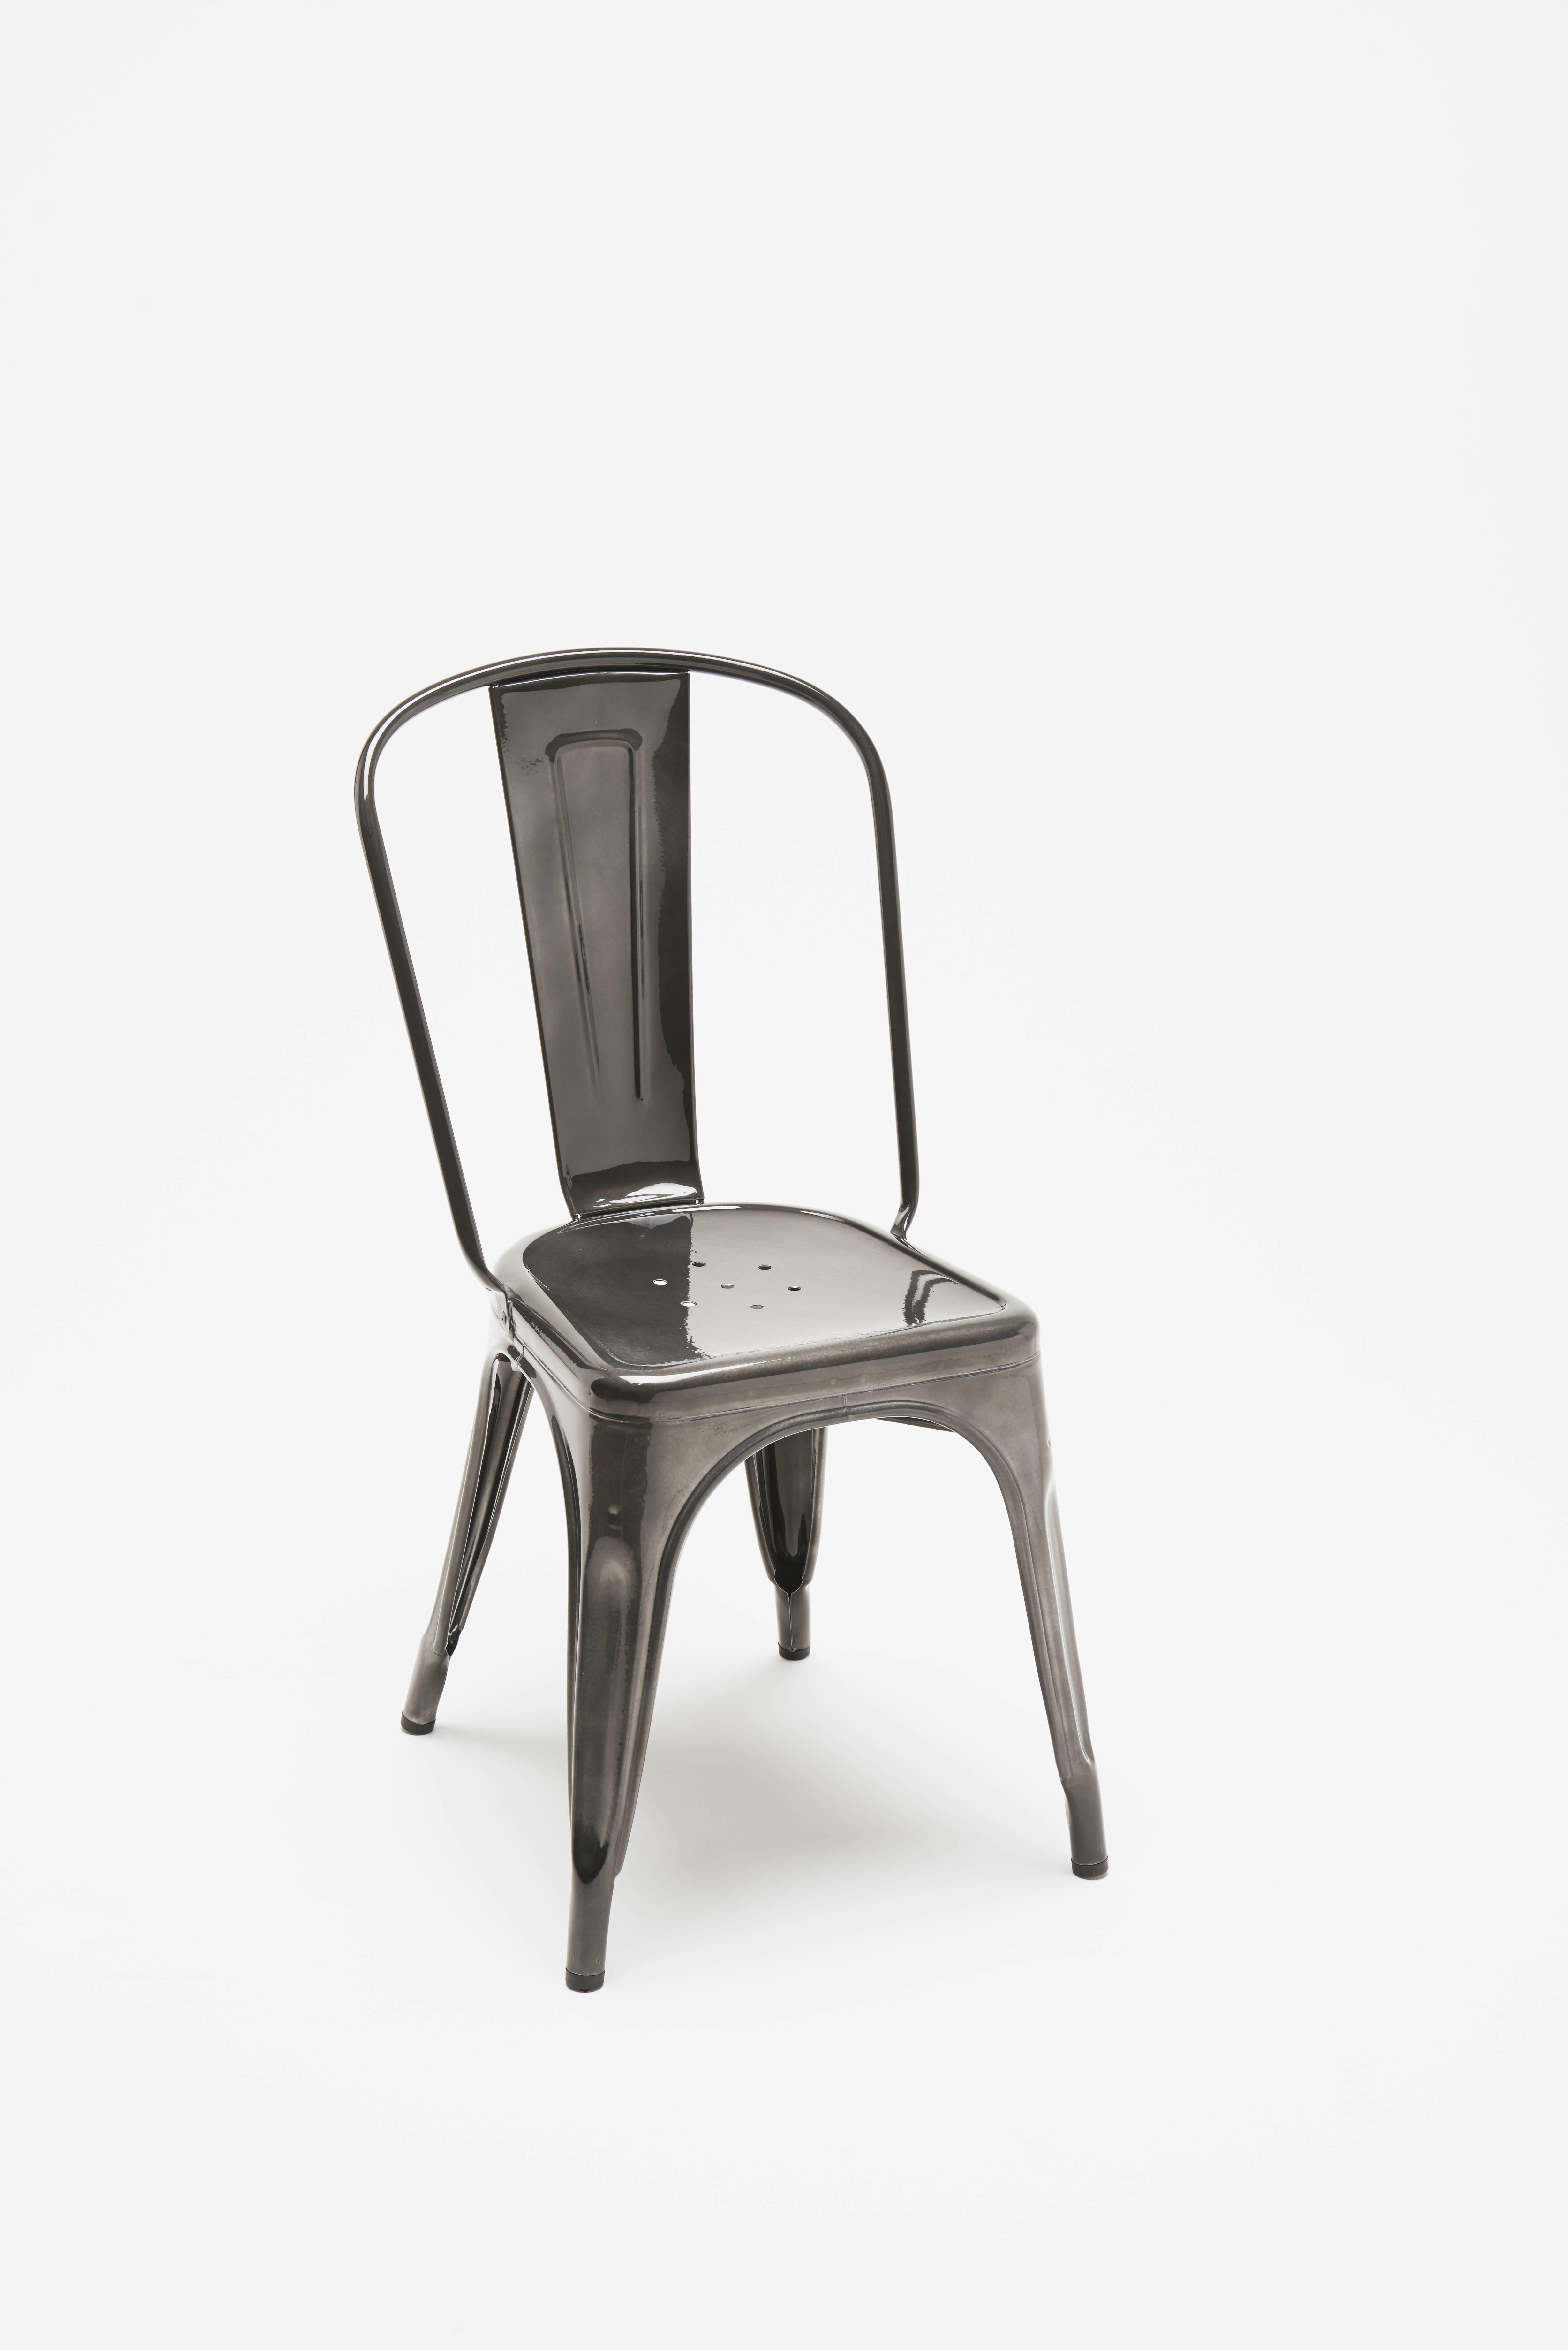 Created in 1927 by Xavier Pauchard, the A Chair met with worldwide success from the beginning. It has been imitated but never equaled! Before becoming part of the collections at the Vitra Museum, the MOMA, the Pompidou Centre and the highly renowned